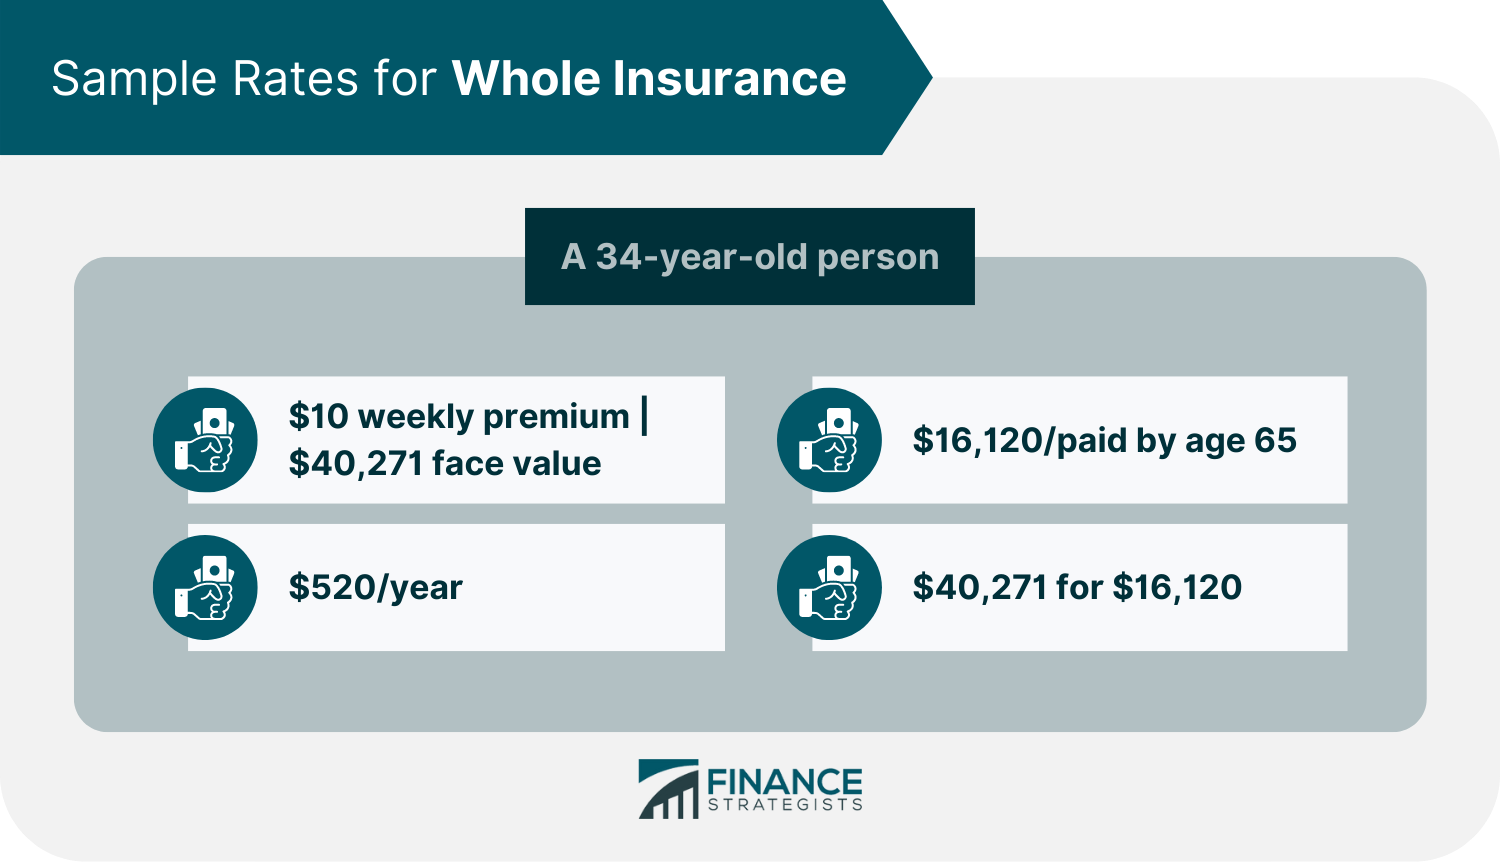 Sample Rates for Whole Insurance (1)